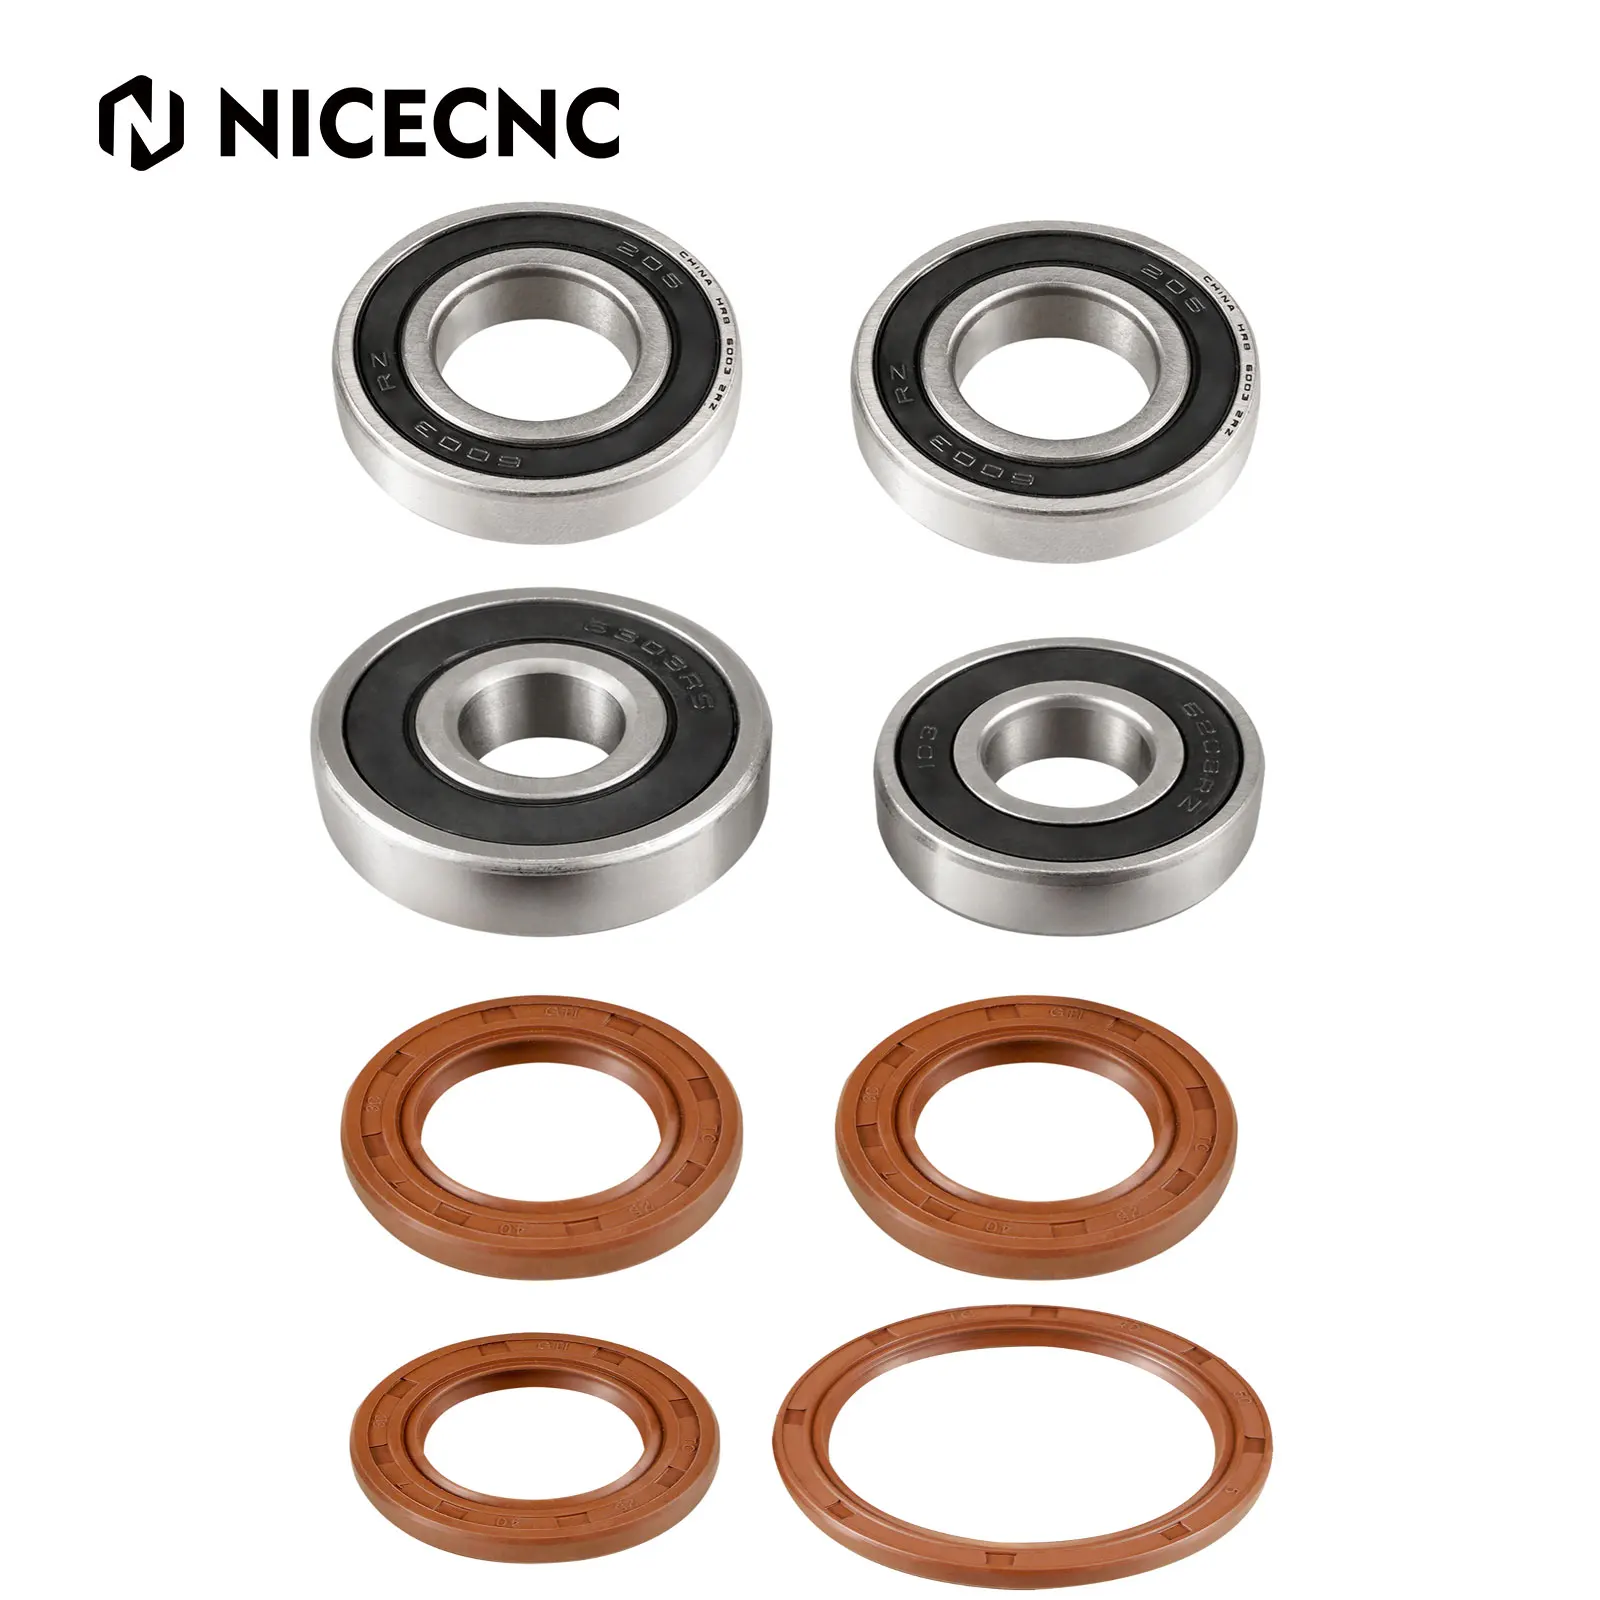 

NiceCNC Motorcycle Front Rear Wheel Bearings and Seals Kit For Honda XR650L XR 650 L 1993-2023 2022 2021 2020 2019 2018 2017